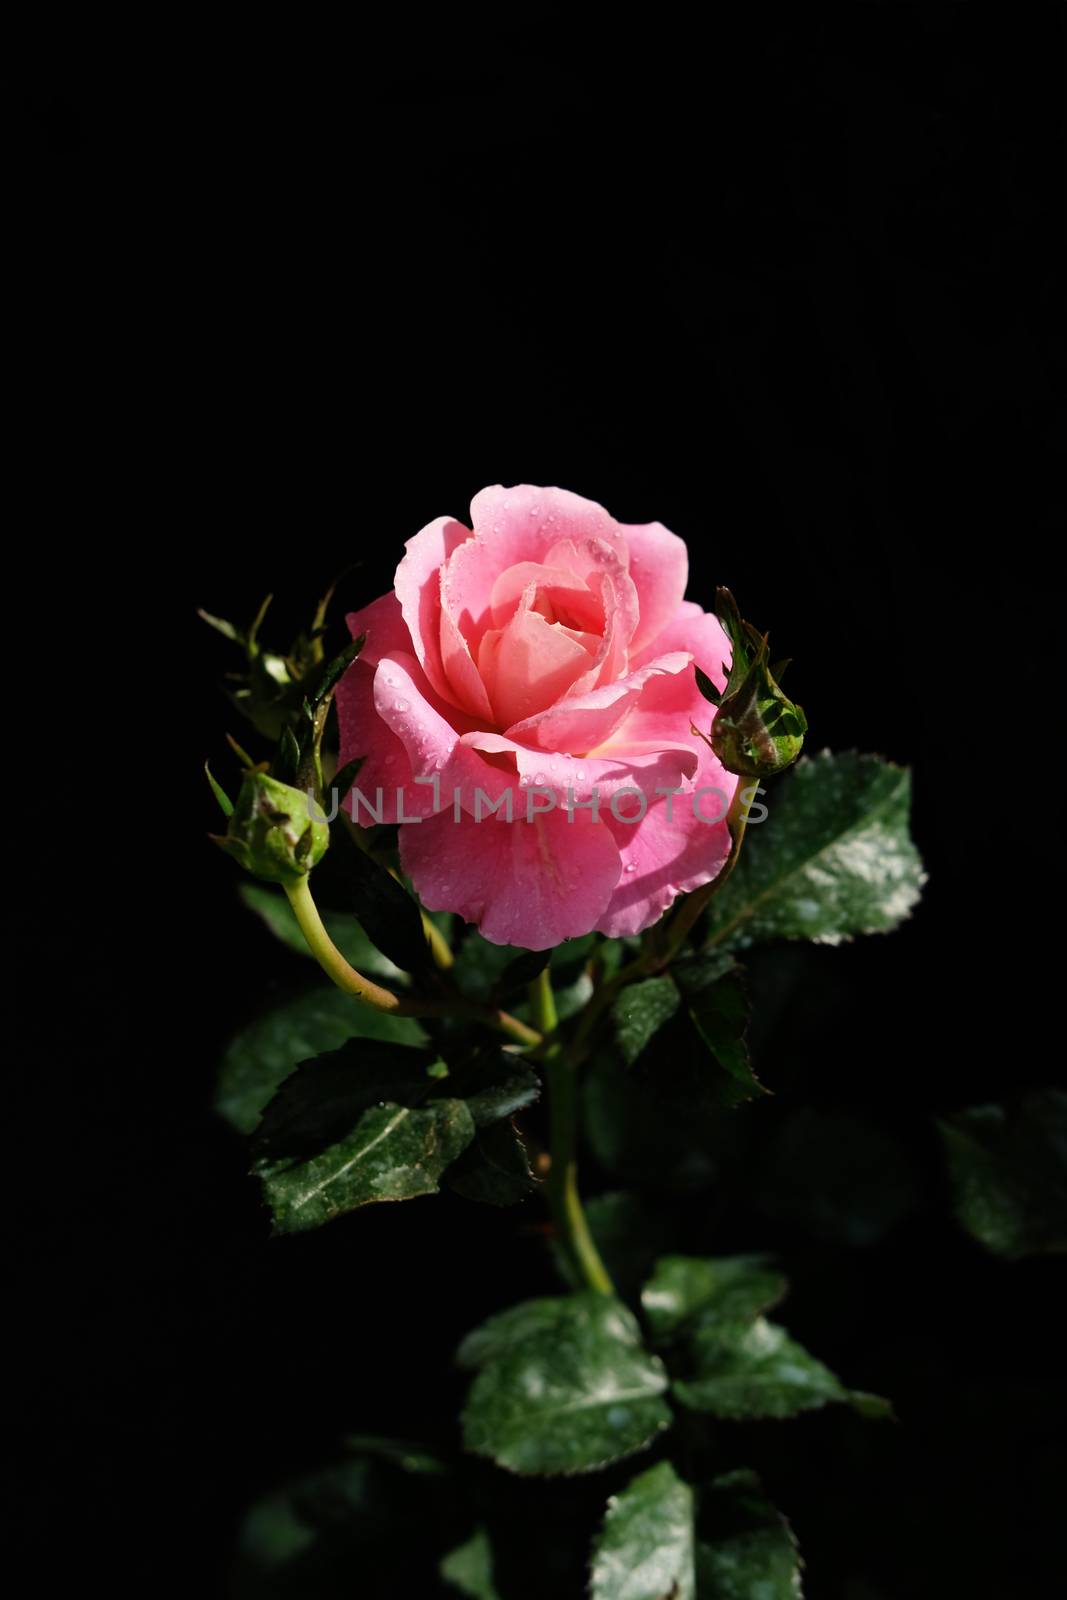 pink rose flower with stem and leaves isolated on black background. Image photo